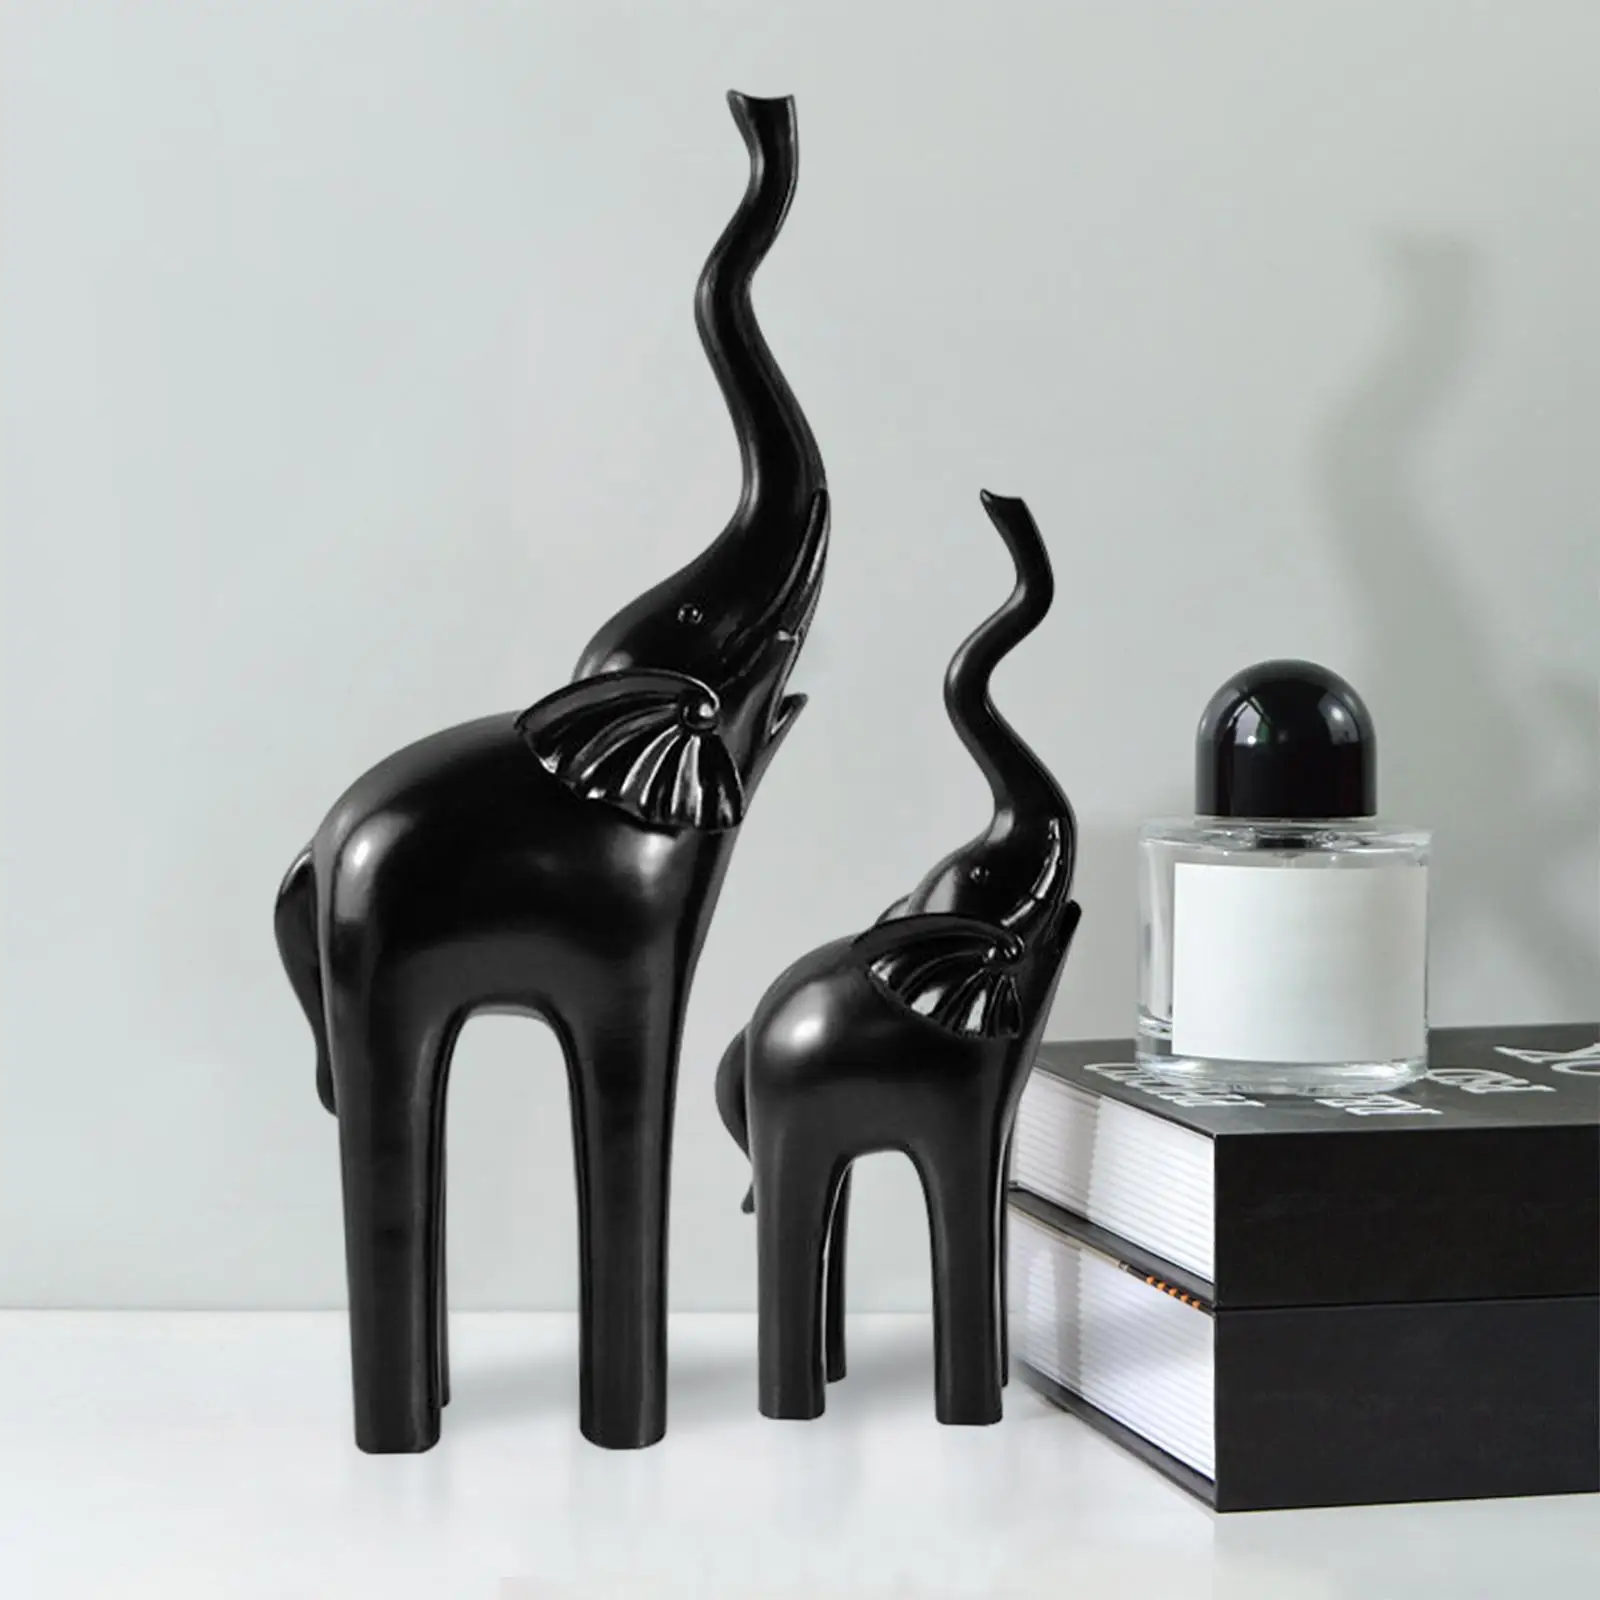 2x Resin Elephant Statue Figurines Crafts Ornaments Nordic Style Animal Sculpture for Living Room Hotel Bedroom Home Decor Gifts